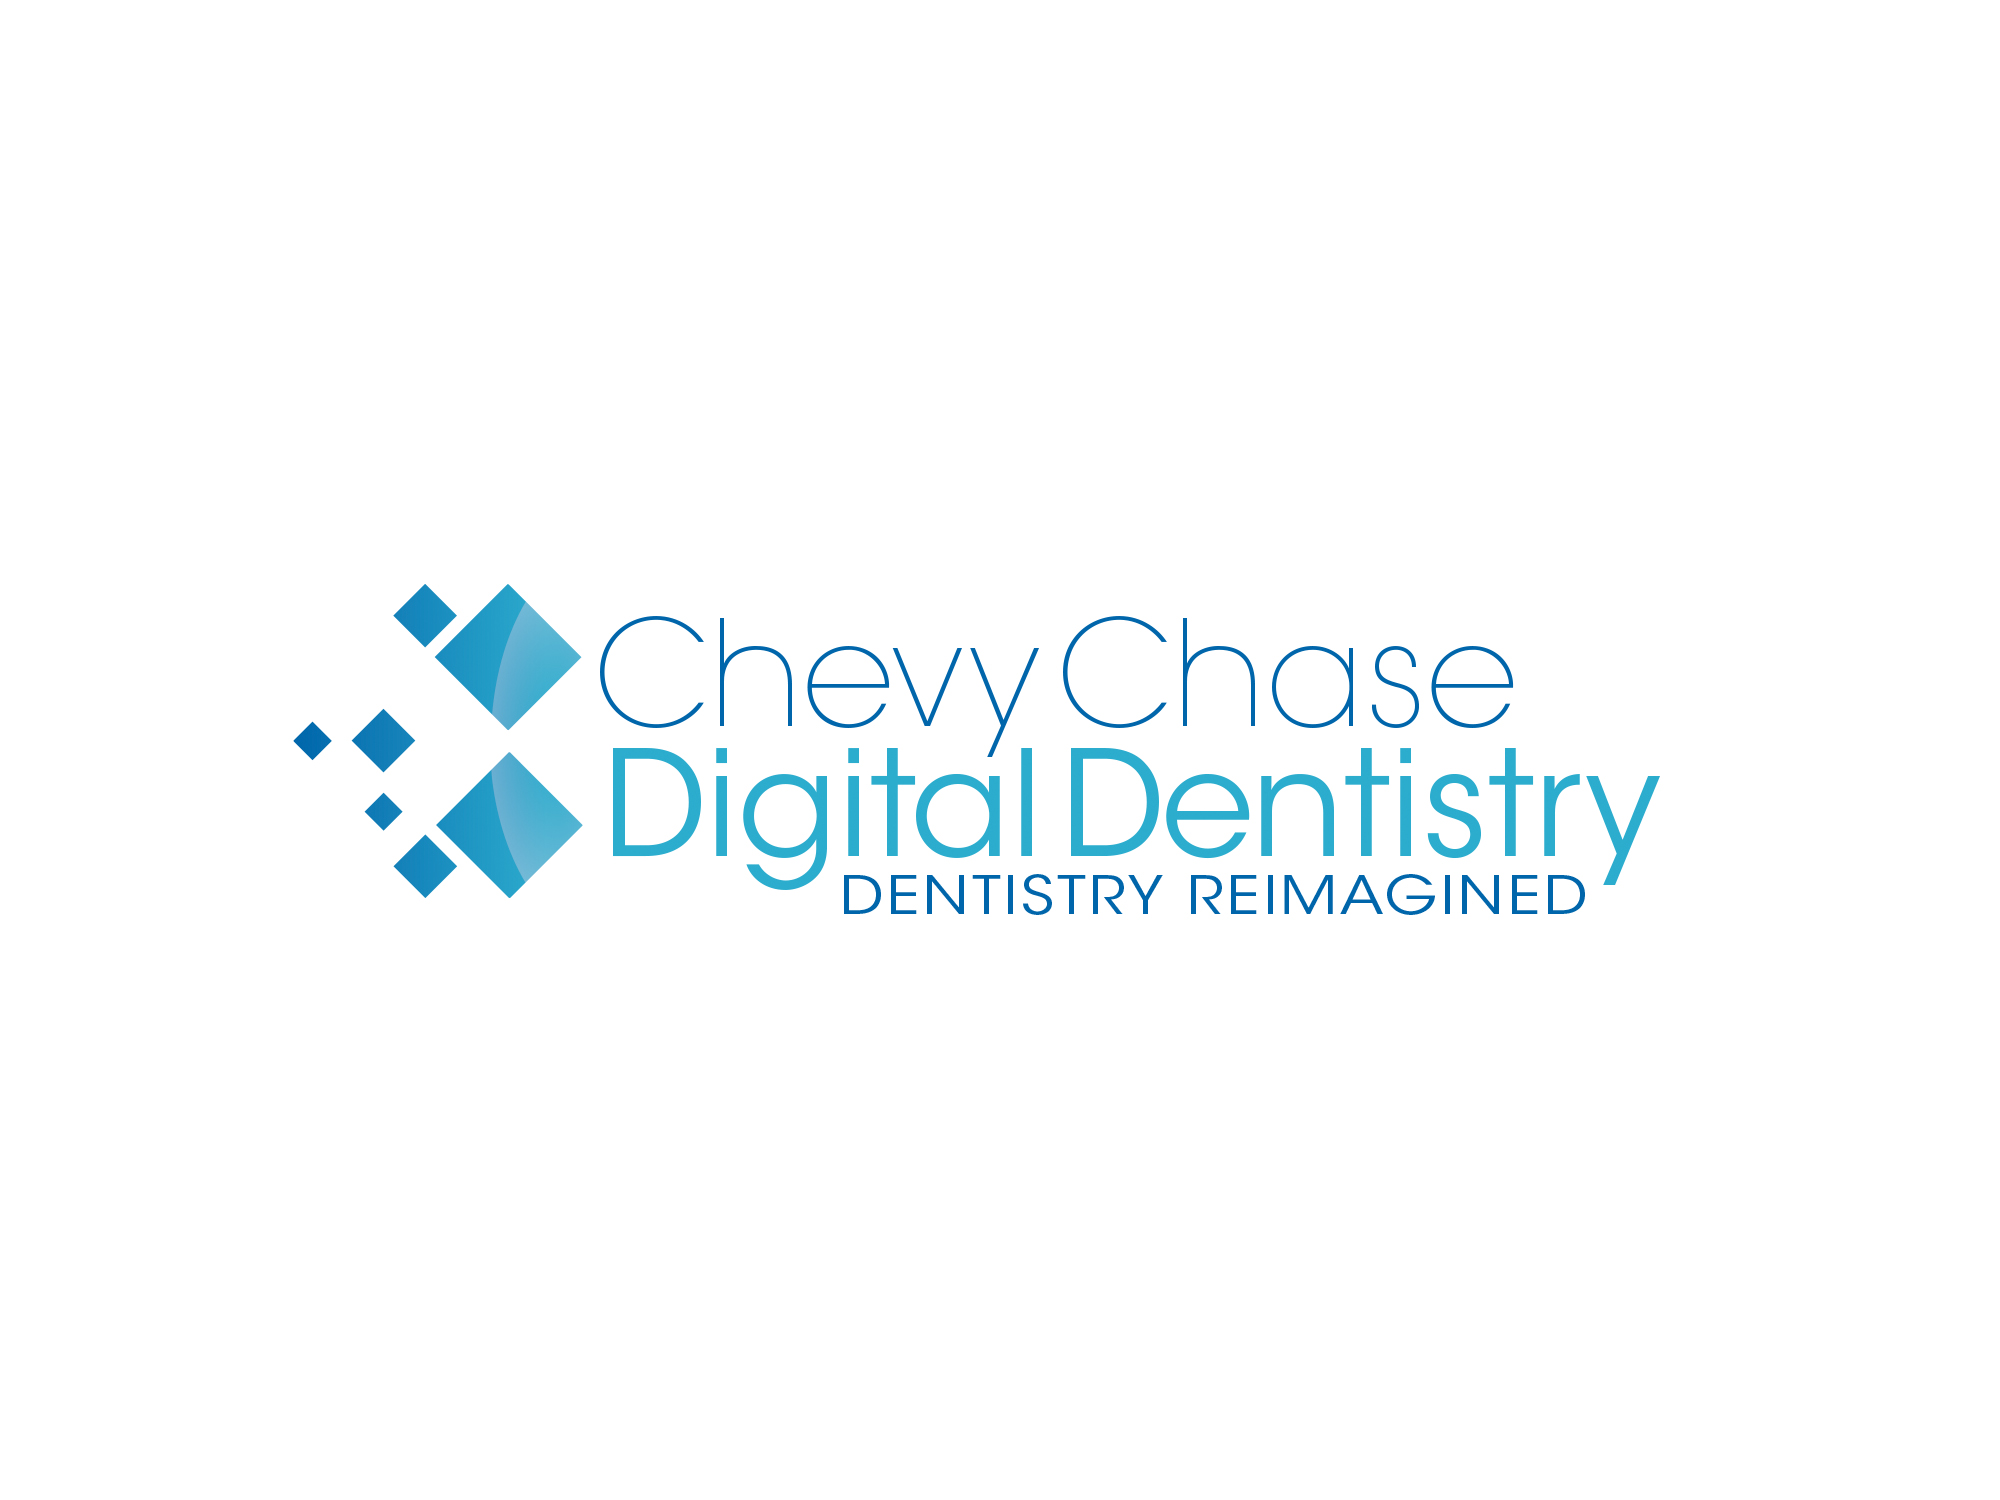 Chevy Chase Digital Dentistry, Andrew Cobb, DDS, 2021.